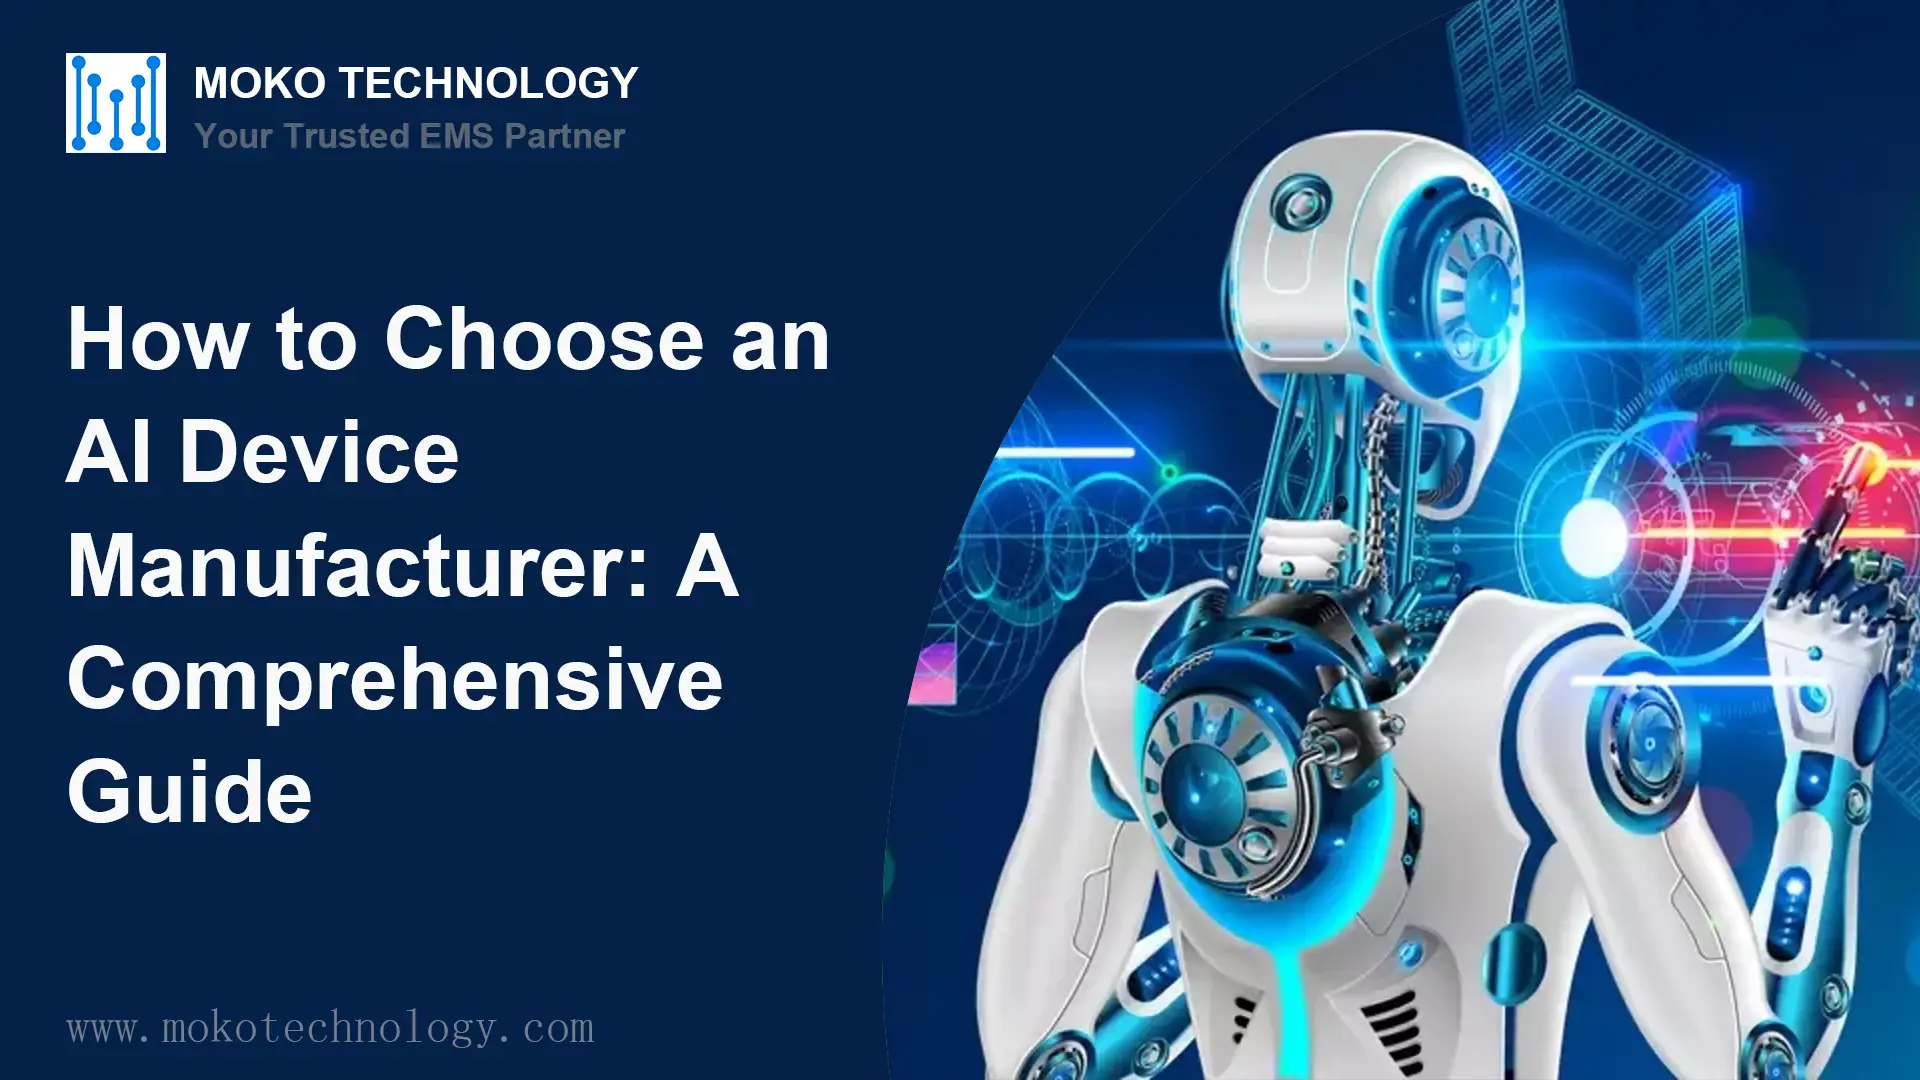 How to Choose an AI Device Manufacturer